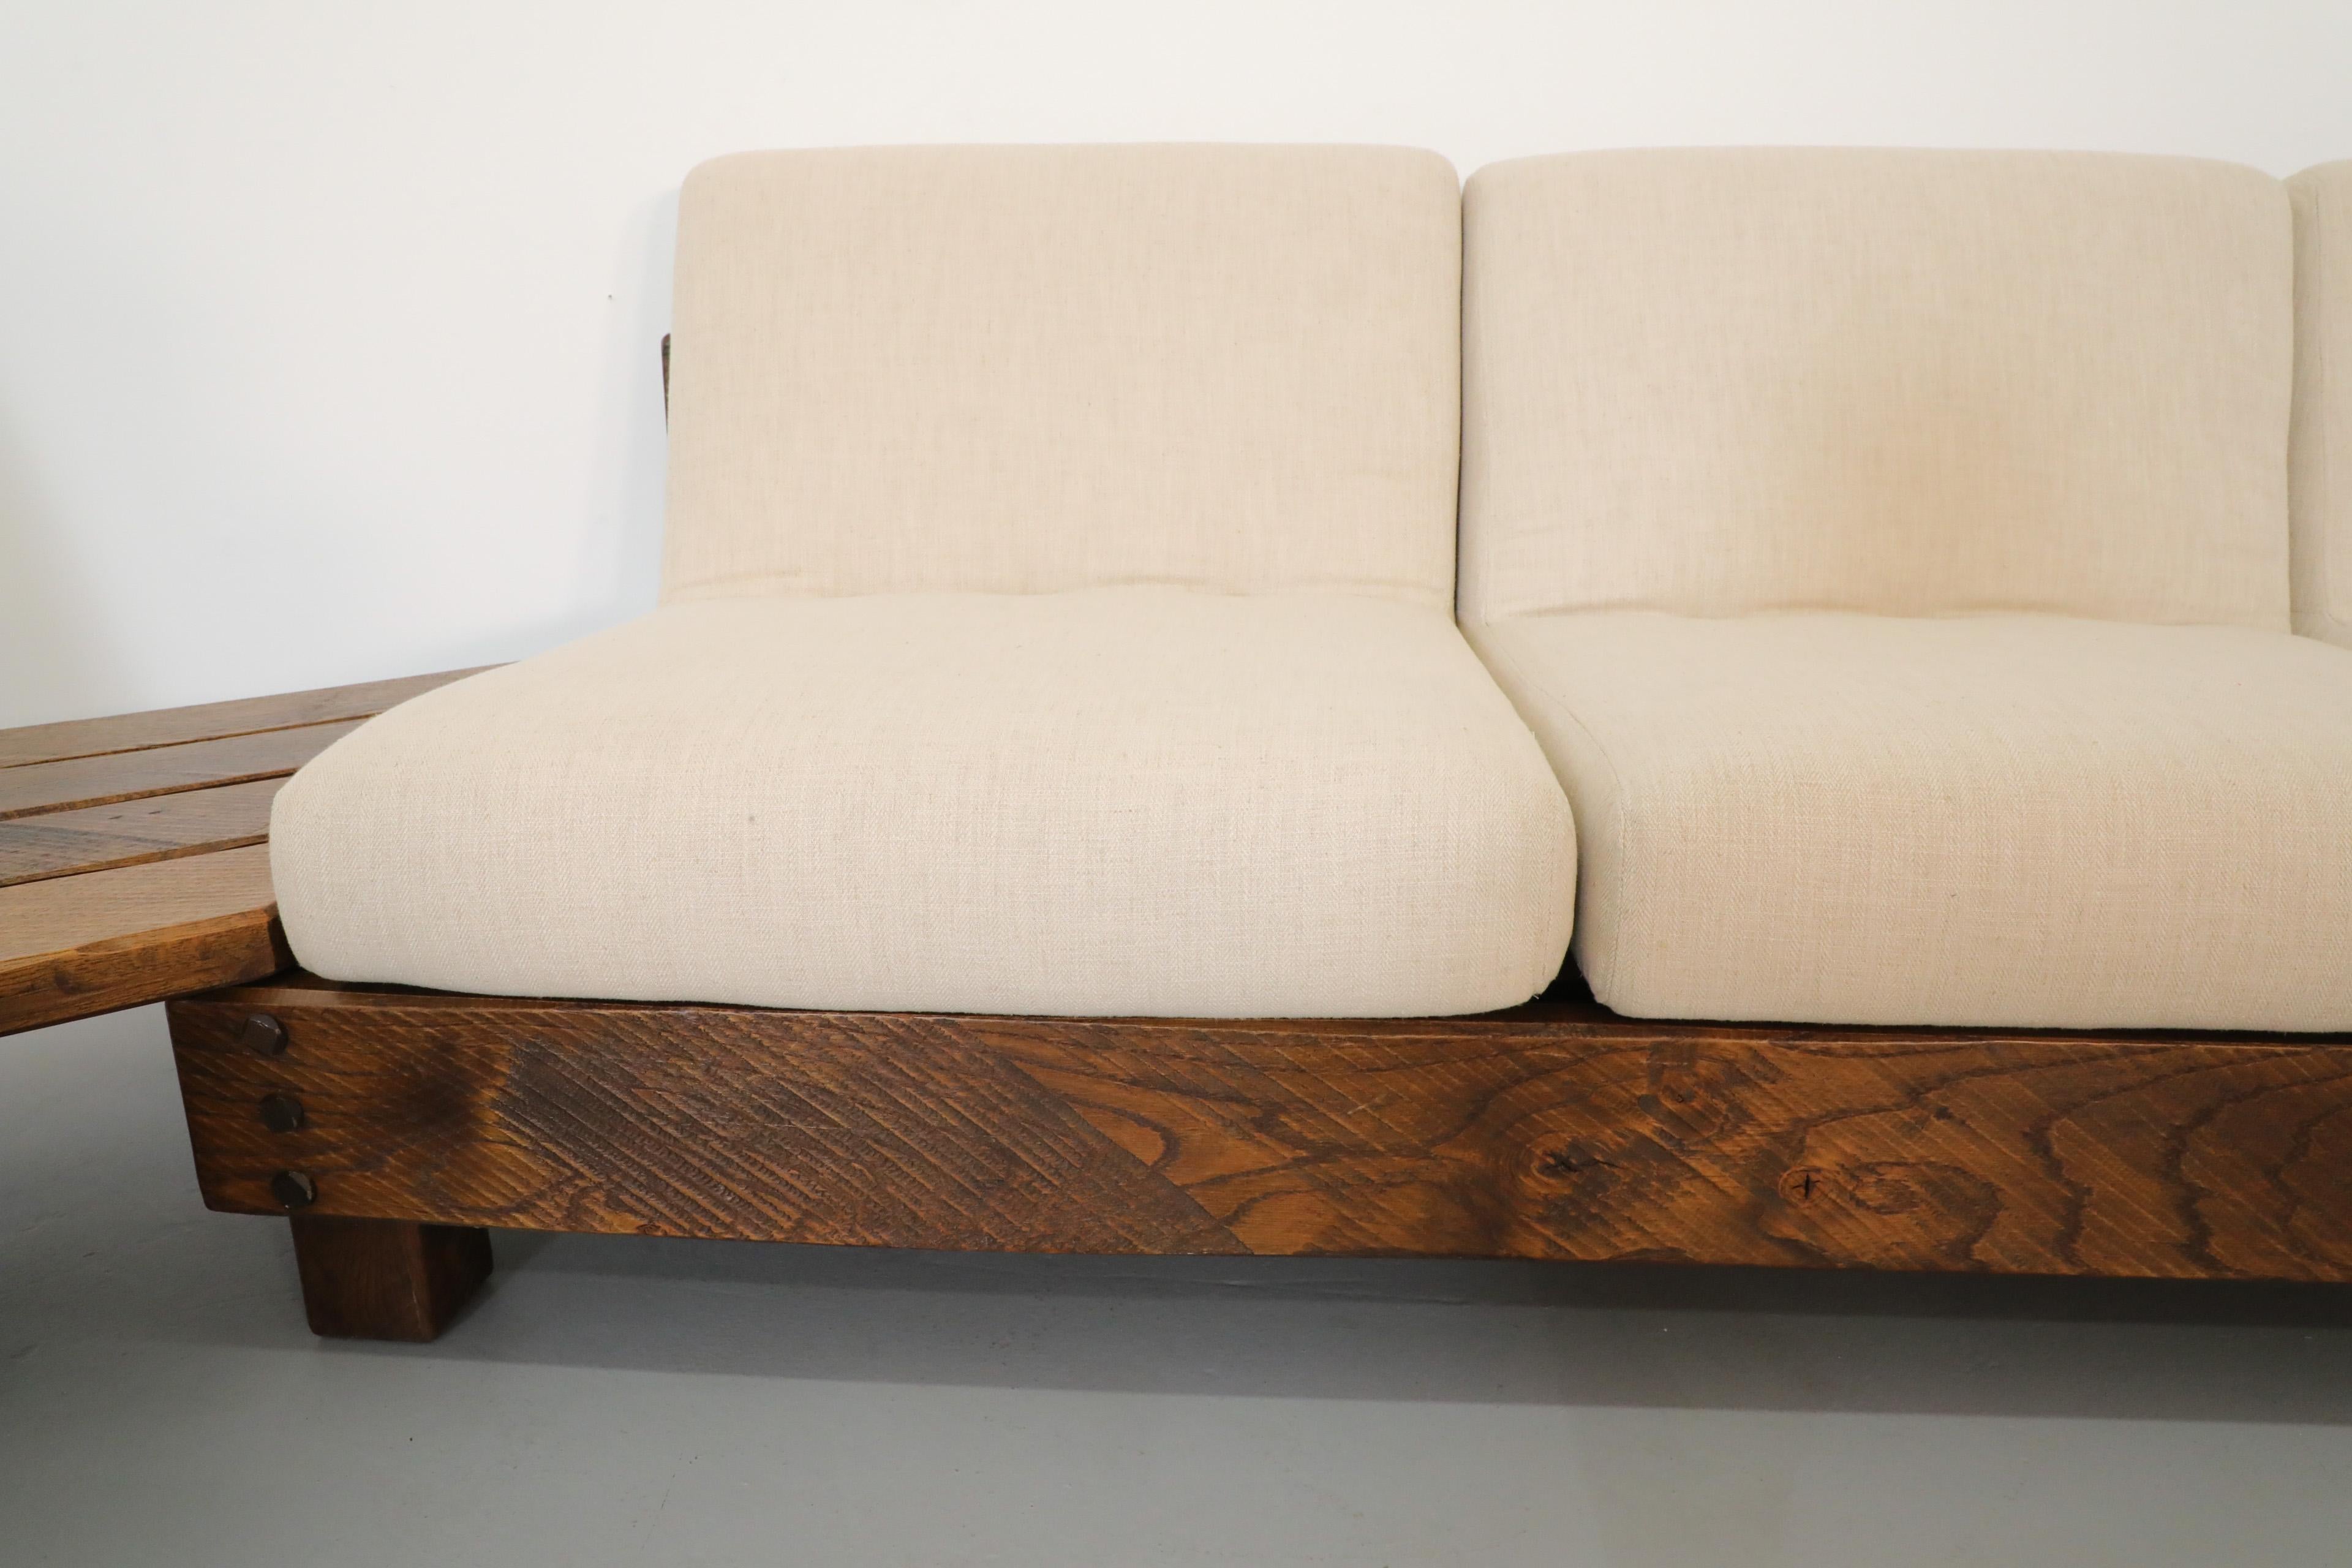 Pierre Chapo Inspired Oak Brutalist Sectional Sofa w/ Built In Corner Table For Sale 6